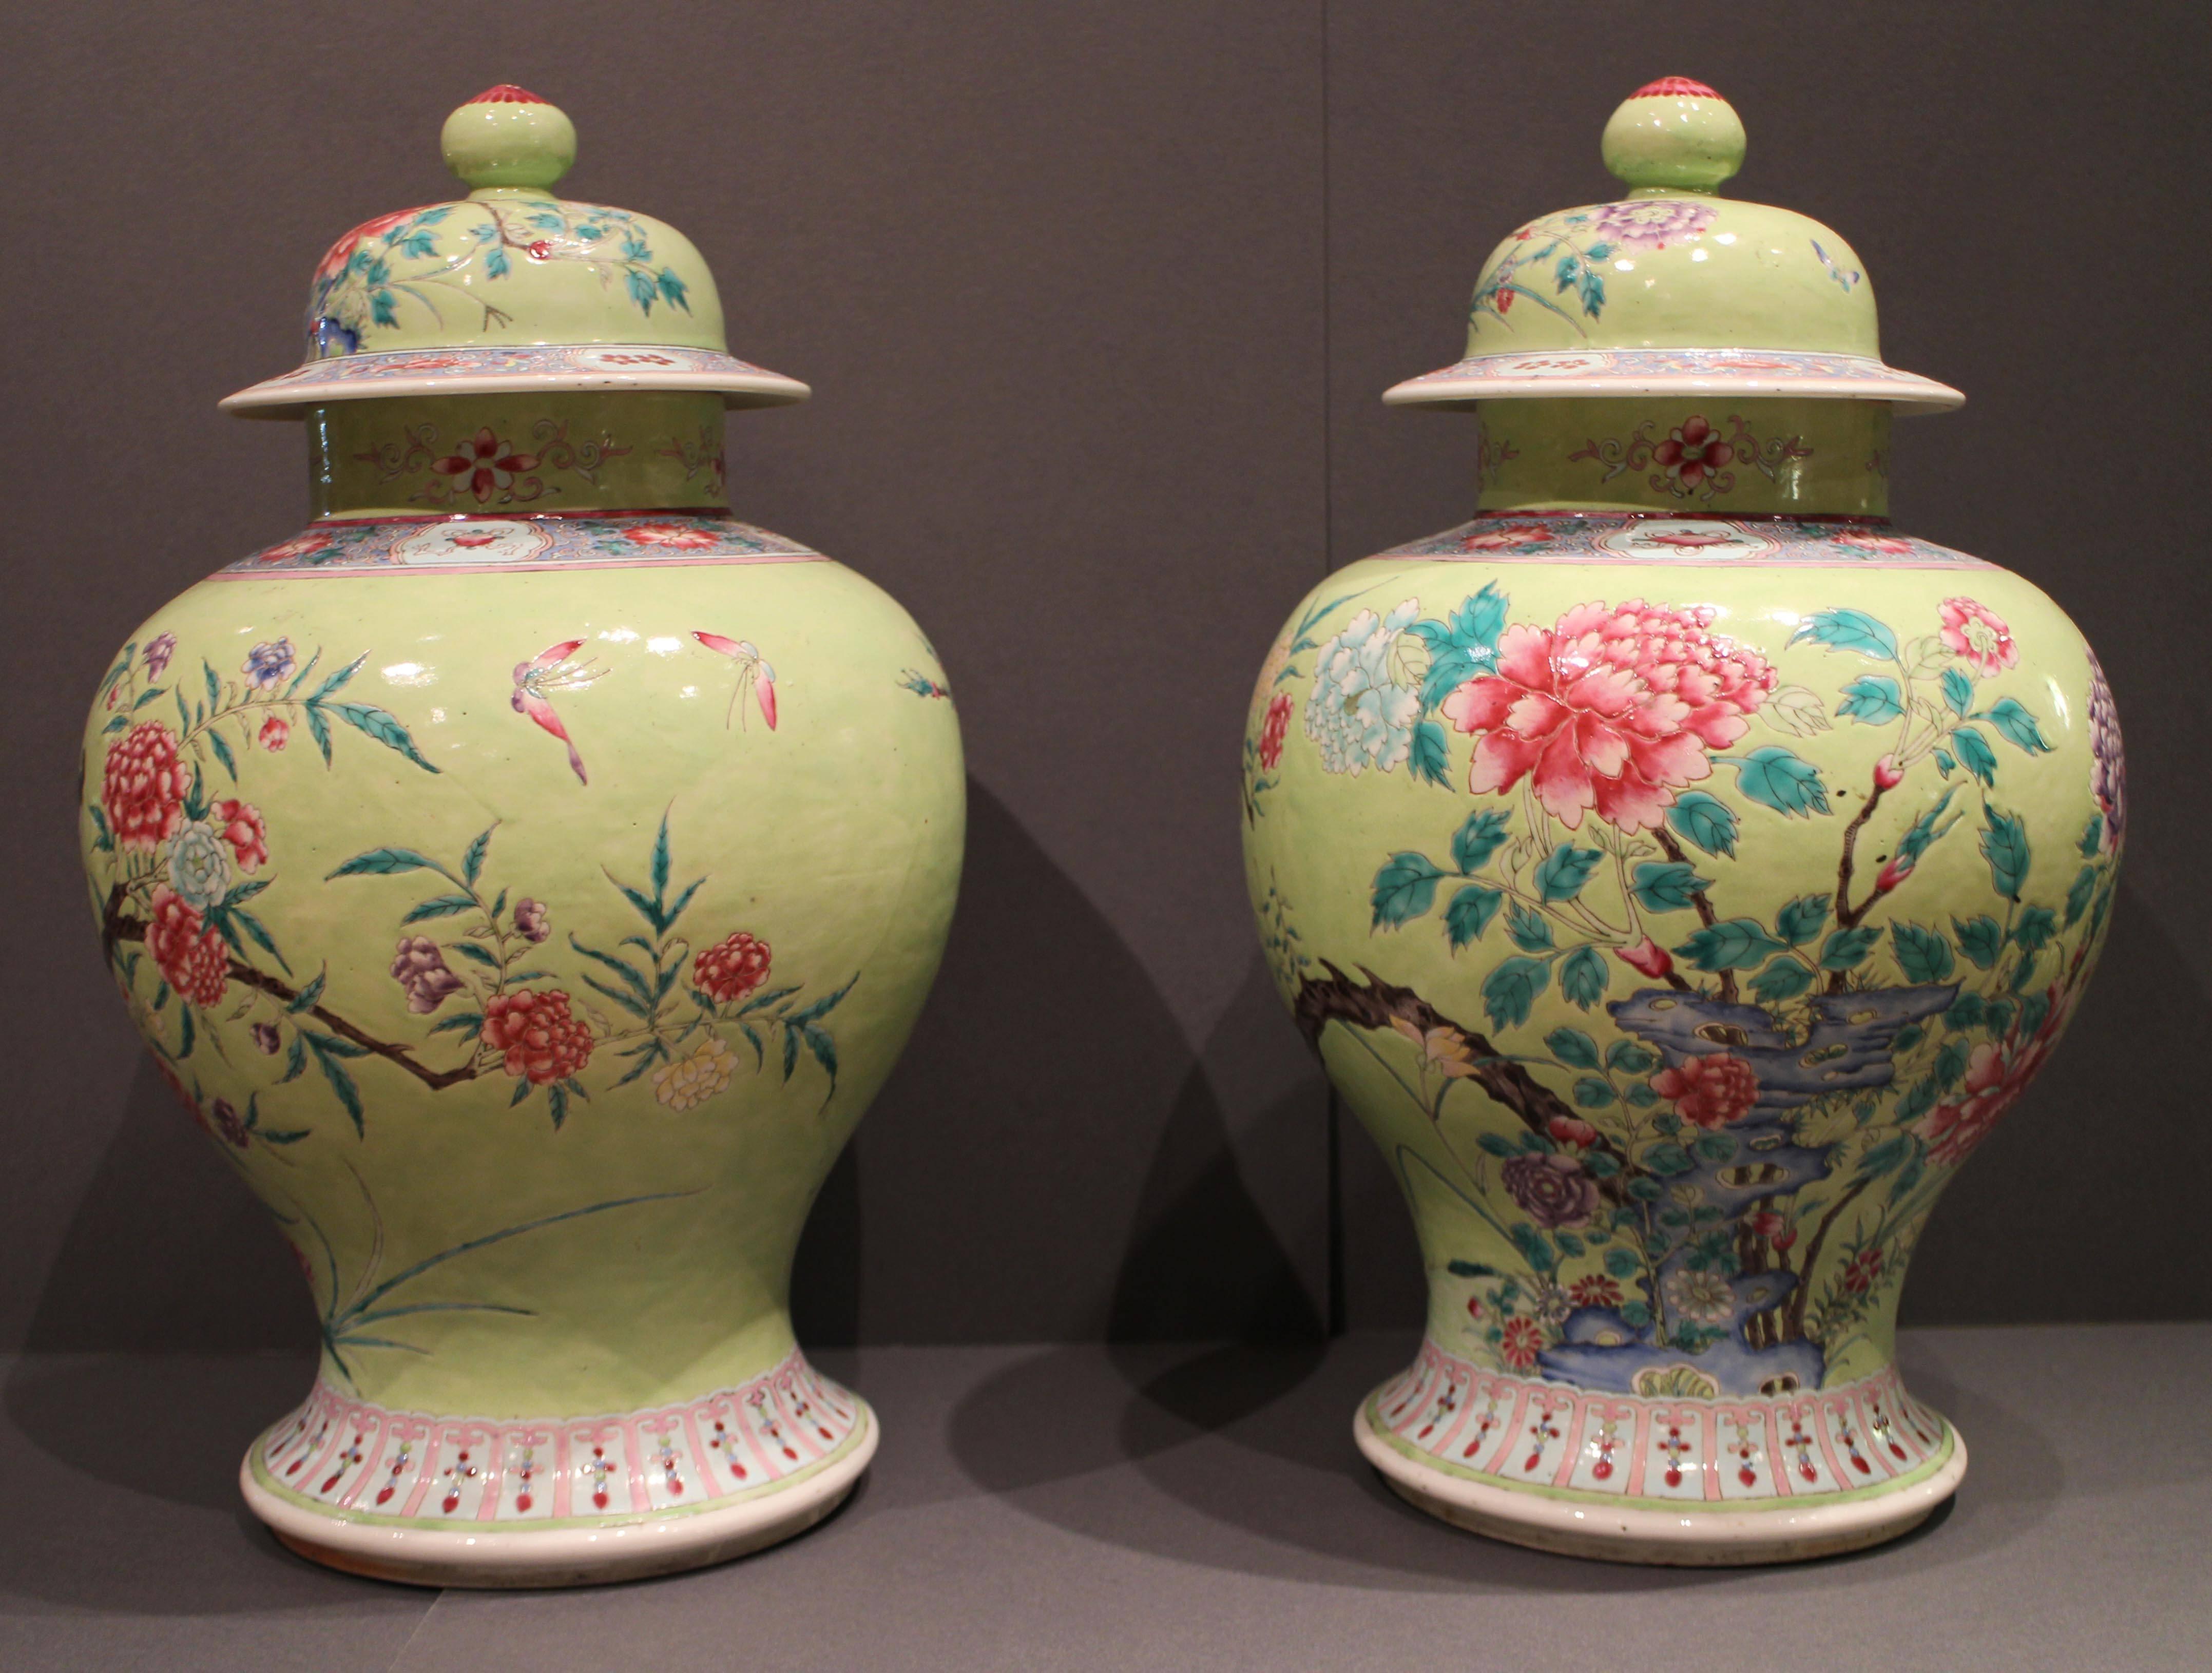 19th Century Pair of Bright Green Antique Chinese Vases Decorated with Flowers and Birds For Sale